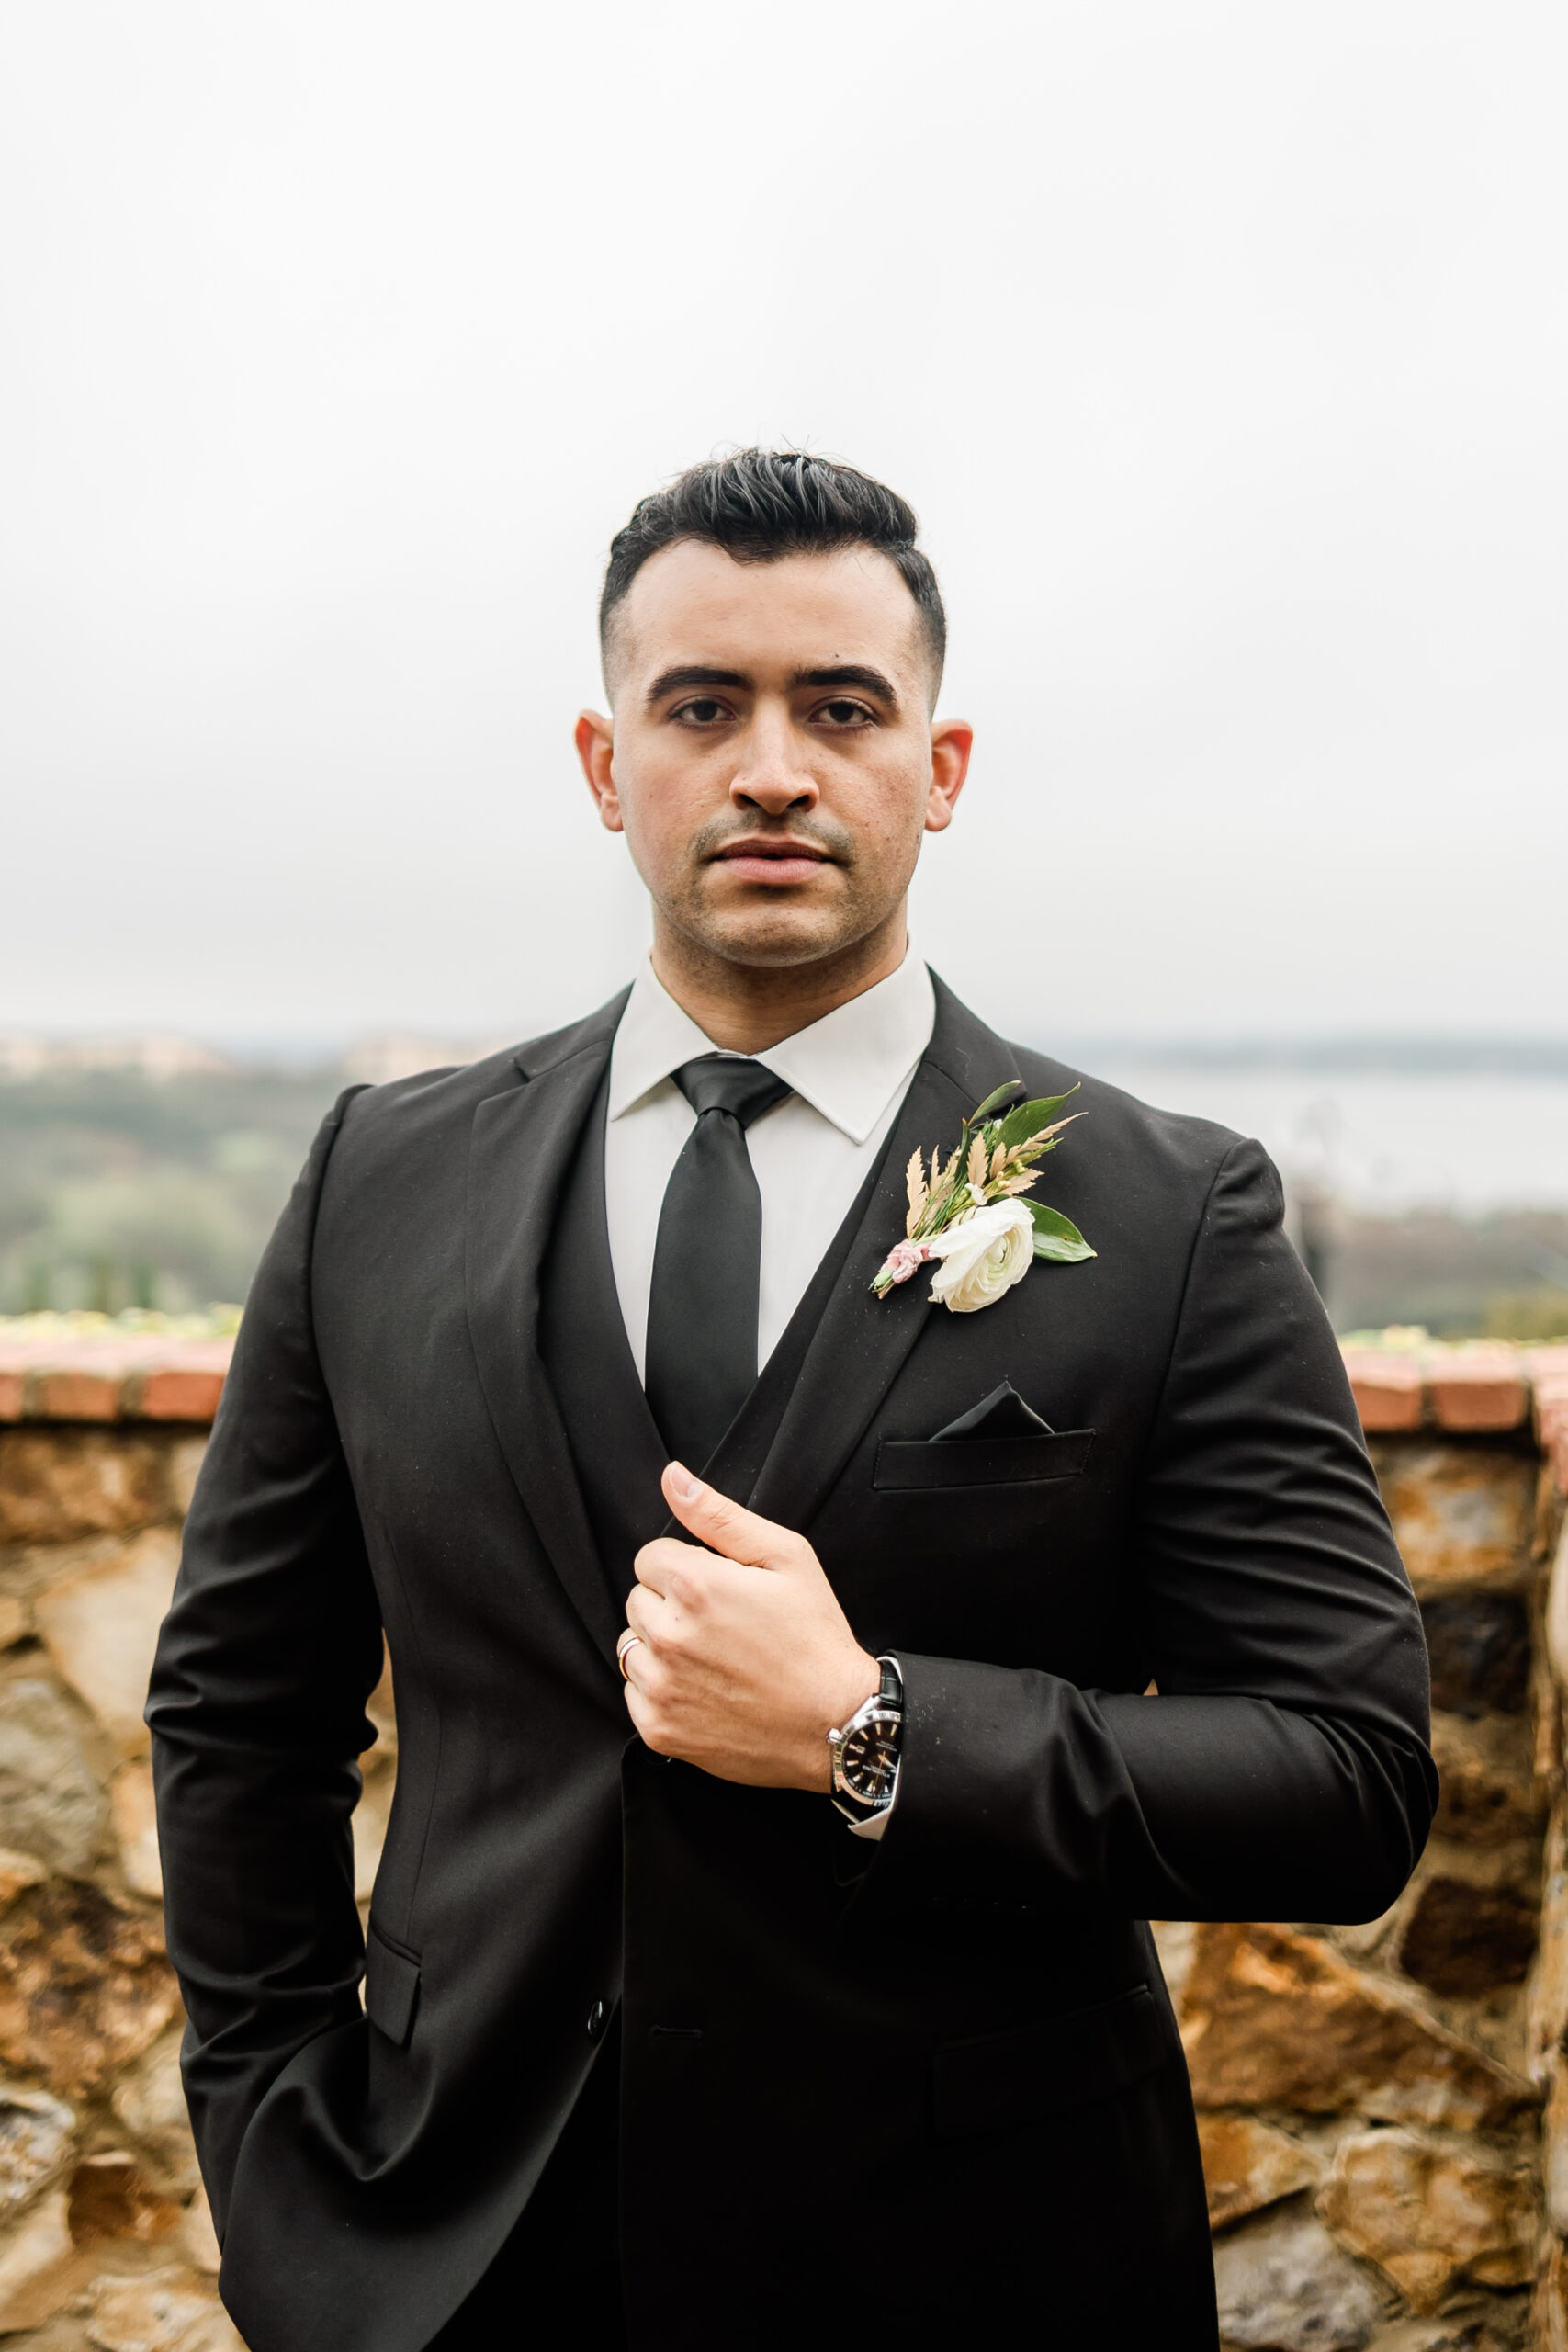 Serious groom wearing a black suit, black tie, and boutonniere for his wedding day